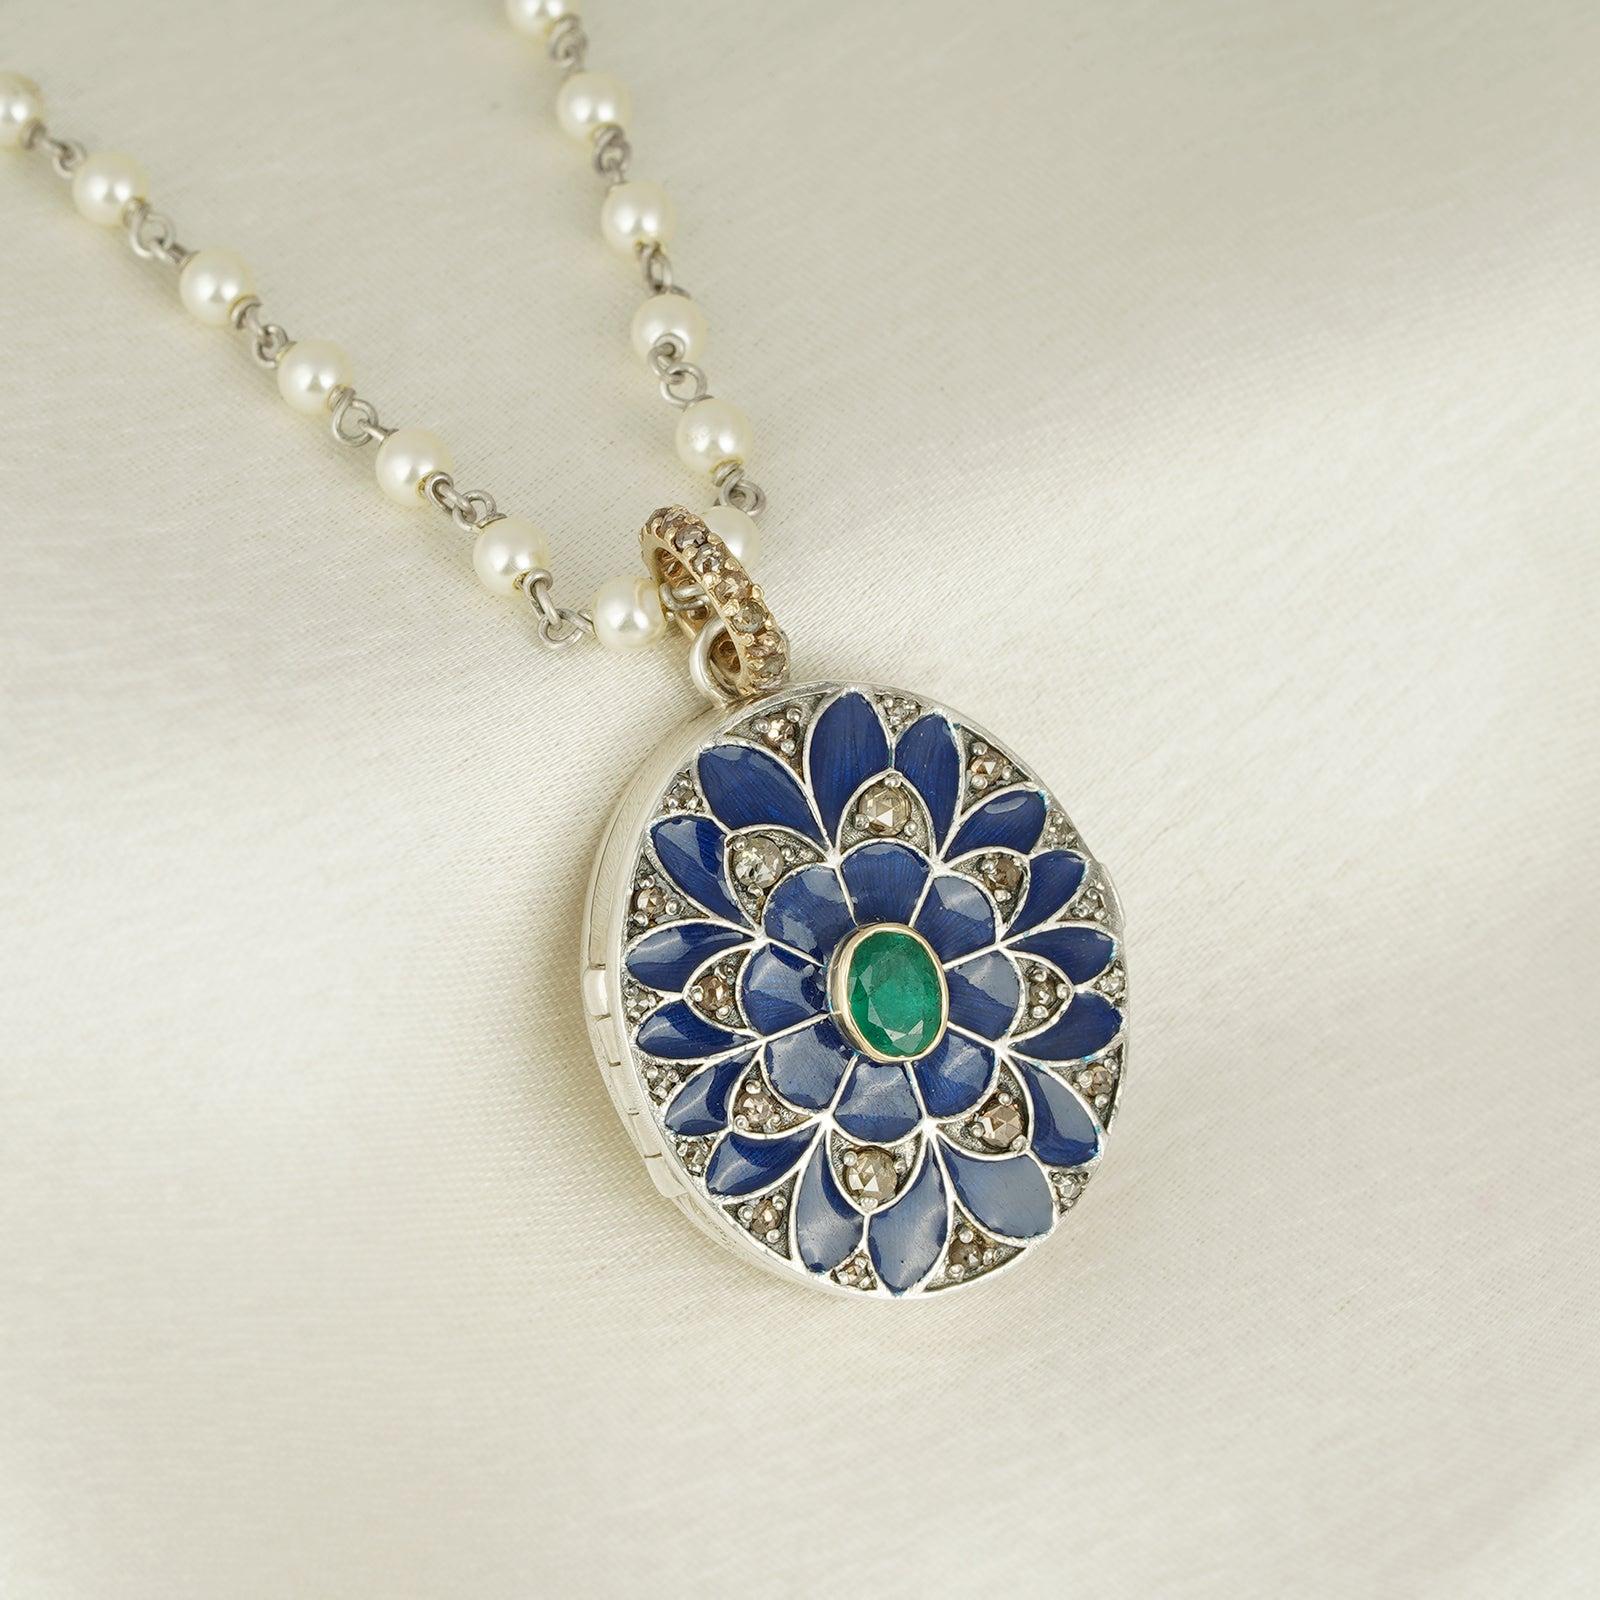 Gold(14K) : 1.92g
Rose-cut Diamonds : 0.67ct
Gemstone : Emerald, Shell Pearl
Other : Blue Enamel
925

A photo is the most prime source of memories. As a pendant, it stays close to your heart, has an aesthetic appeal but it also holds stories on the